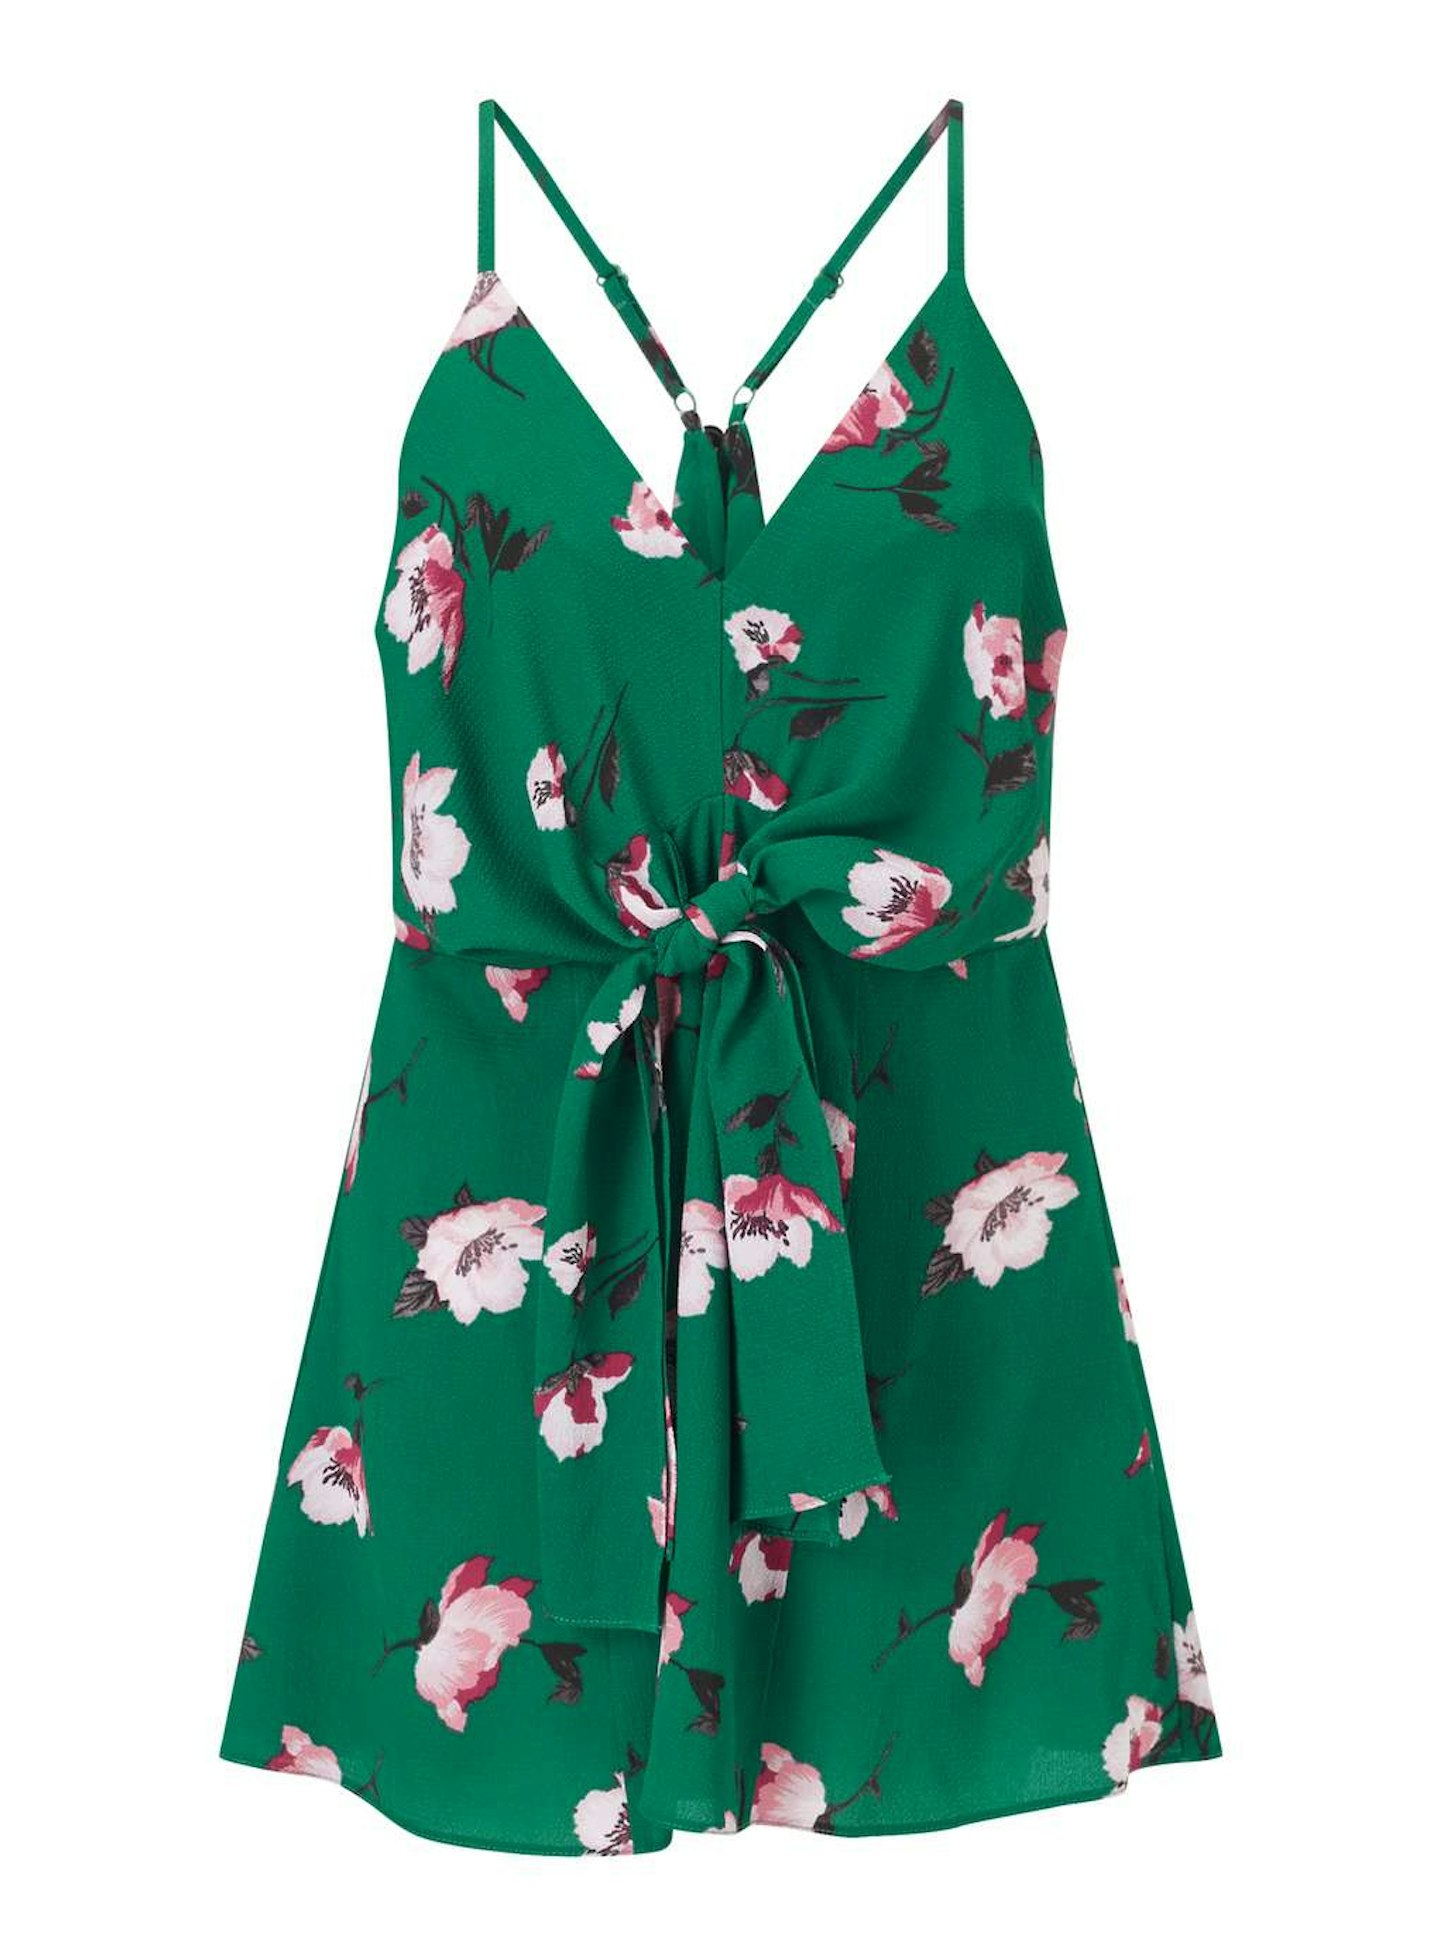 Green floral tie front playsuit by Miss Selfridge, £32